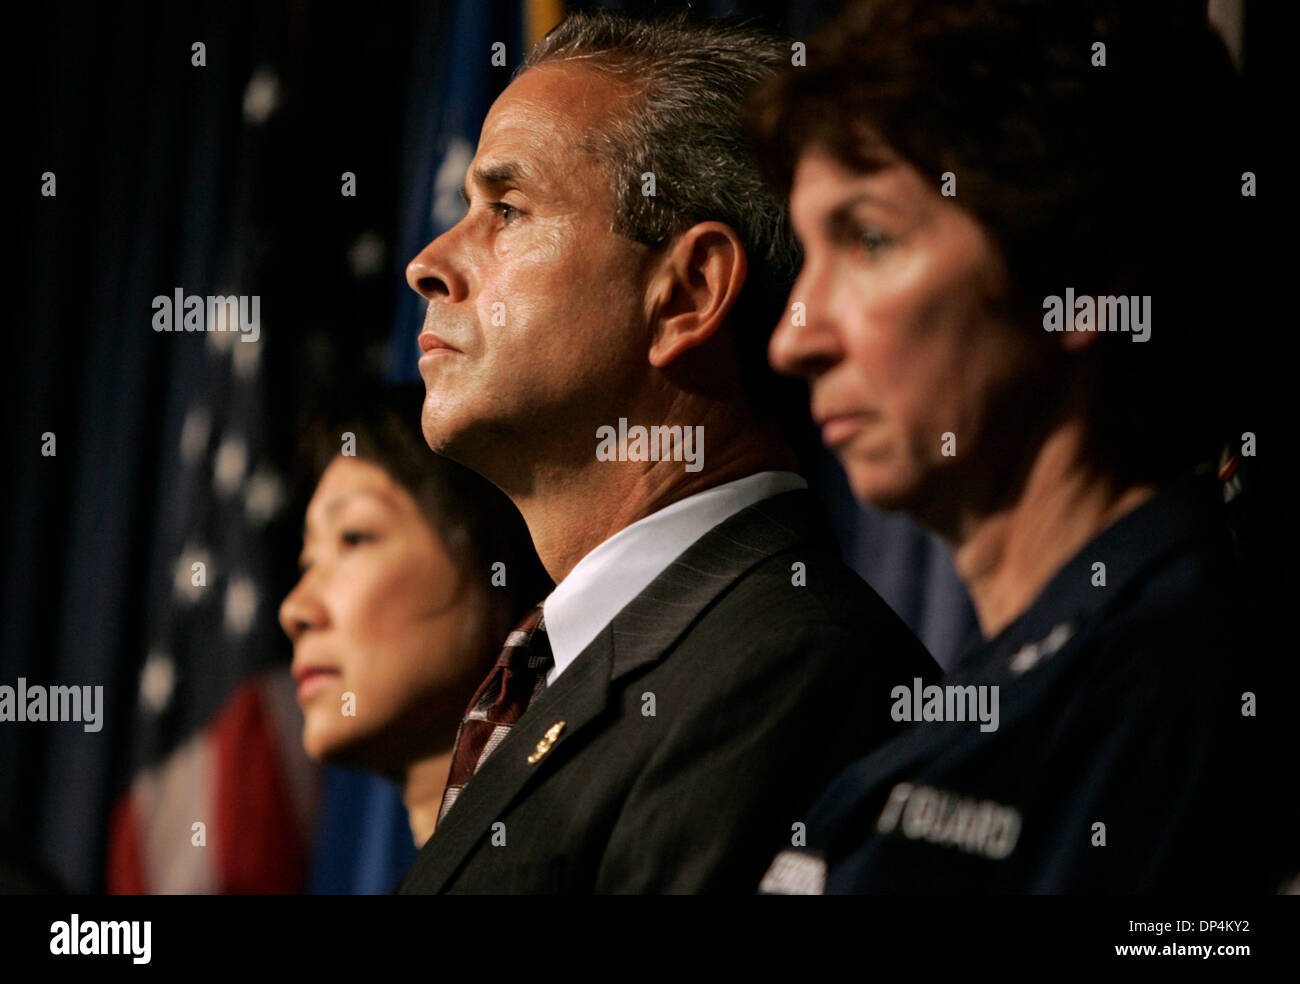 Aug 17, 2006; San Diego, CA, USA; US Attorney CAROL LAM, left, JOHN FERNANDES, Special Agent in Charge of the San Diego Office of the DEA, center, and US COAST GUARD Rear Admiral JODY BRECKENRIDGE, right, listen to a press conference discussing the arrest on Monday August 14, 2006 in international waters off Baja California of  Francisco Javier Arellano Felix, the kingpin of the Ar Stock Photo